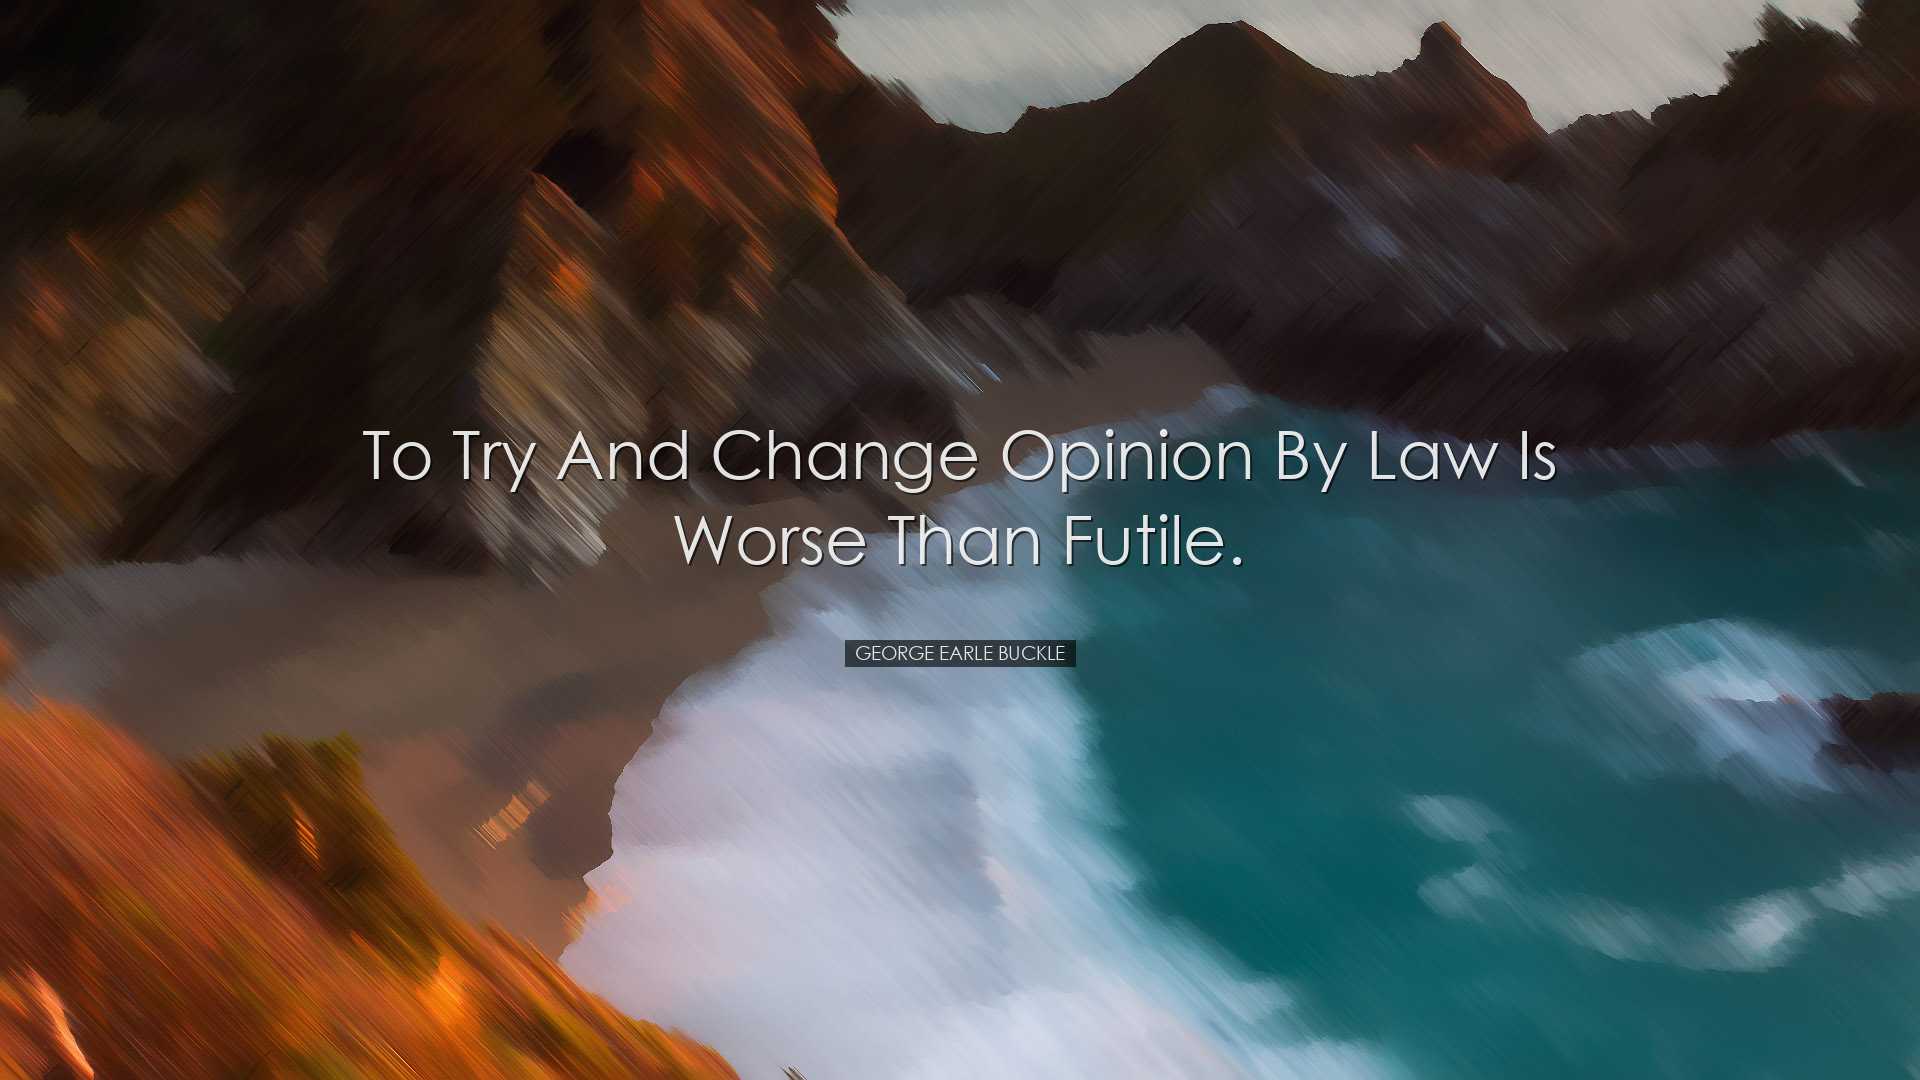 To try and change opinion by law is worse than futile. - George Ea